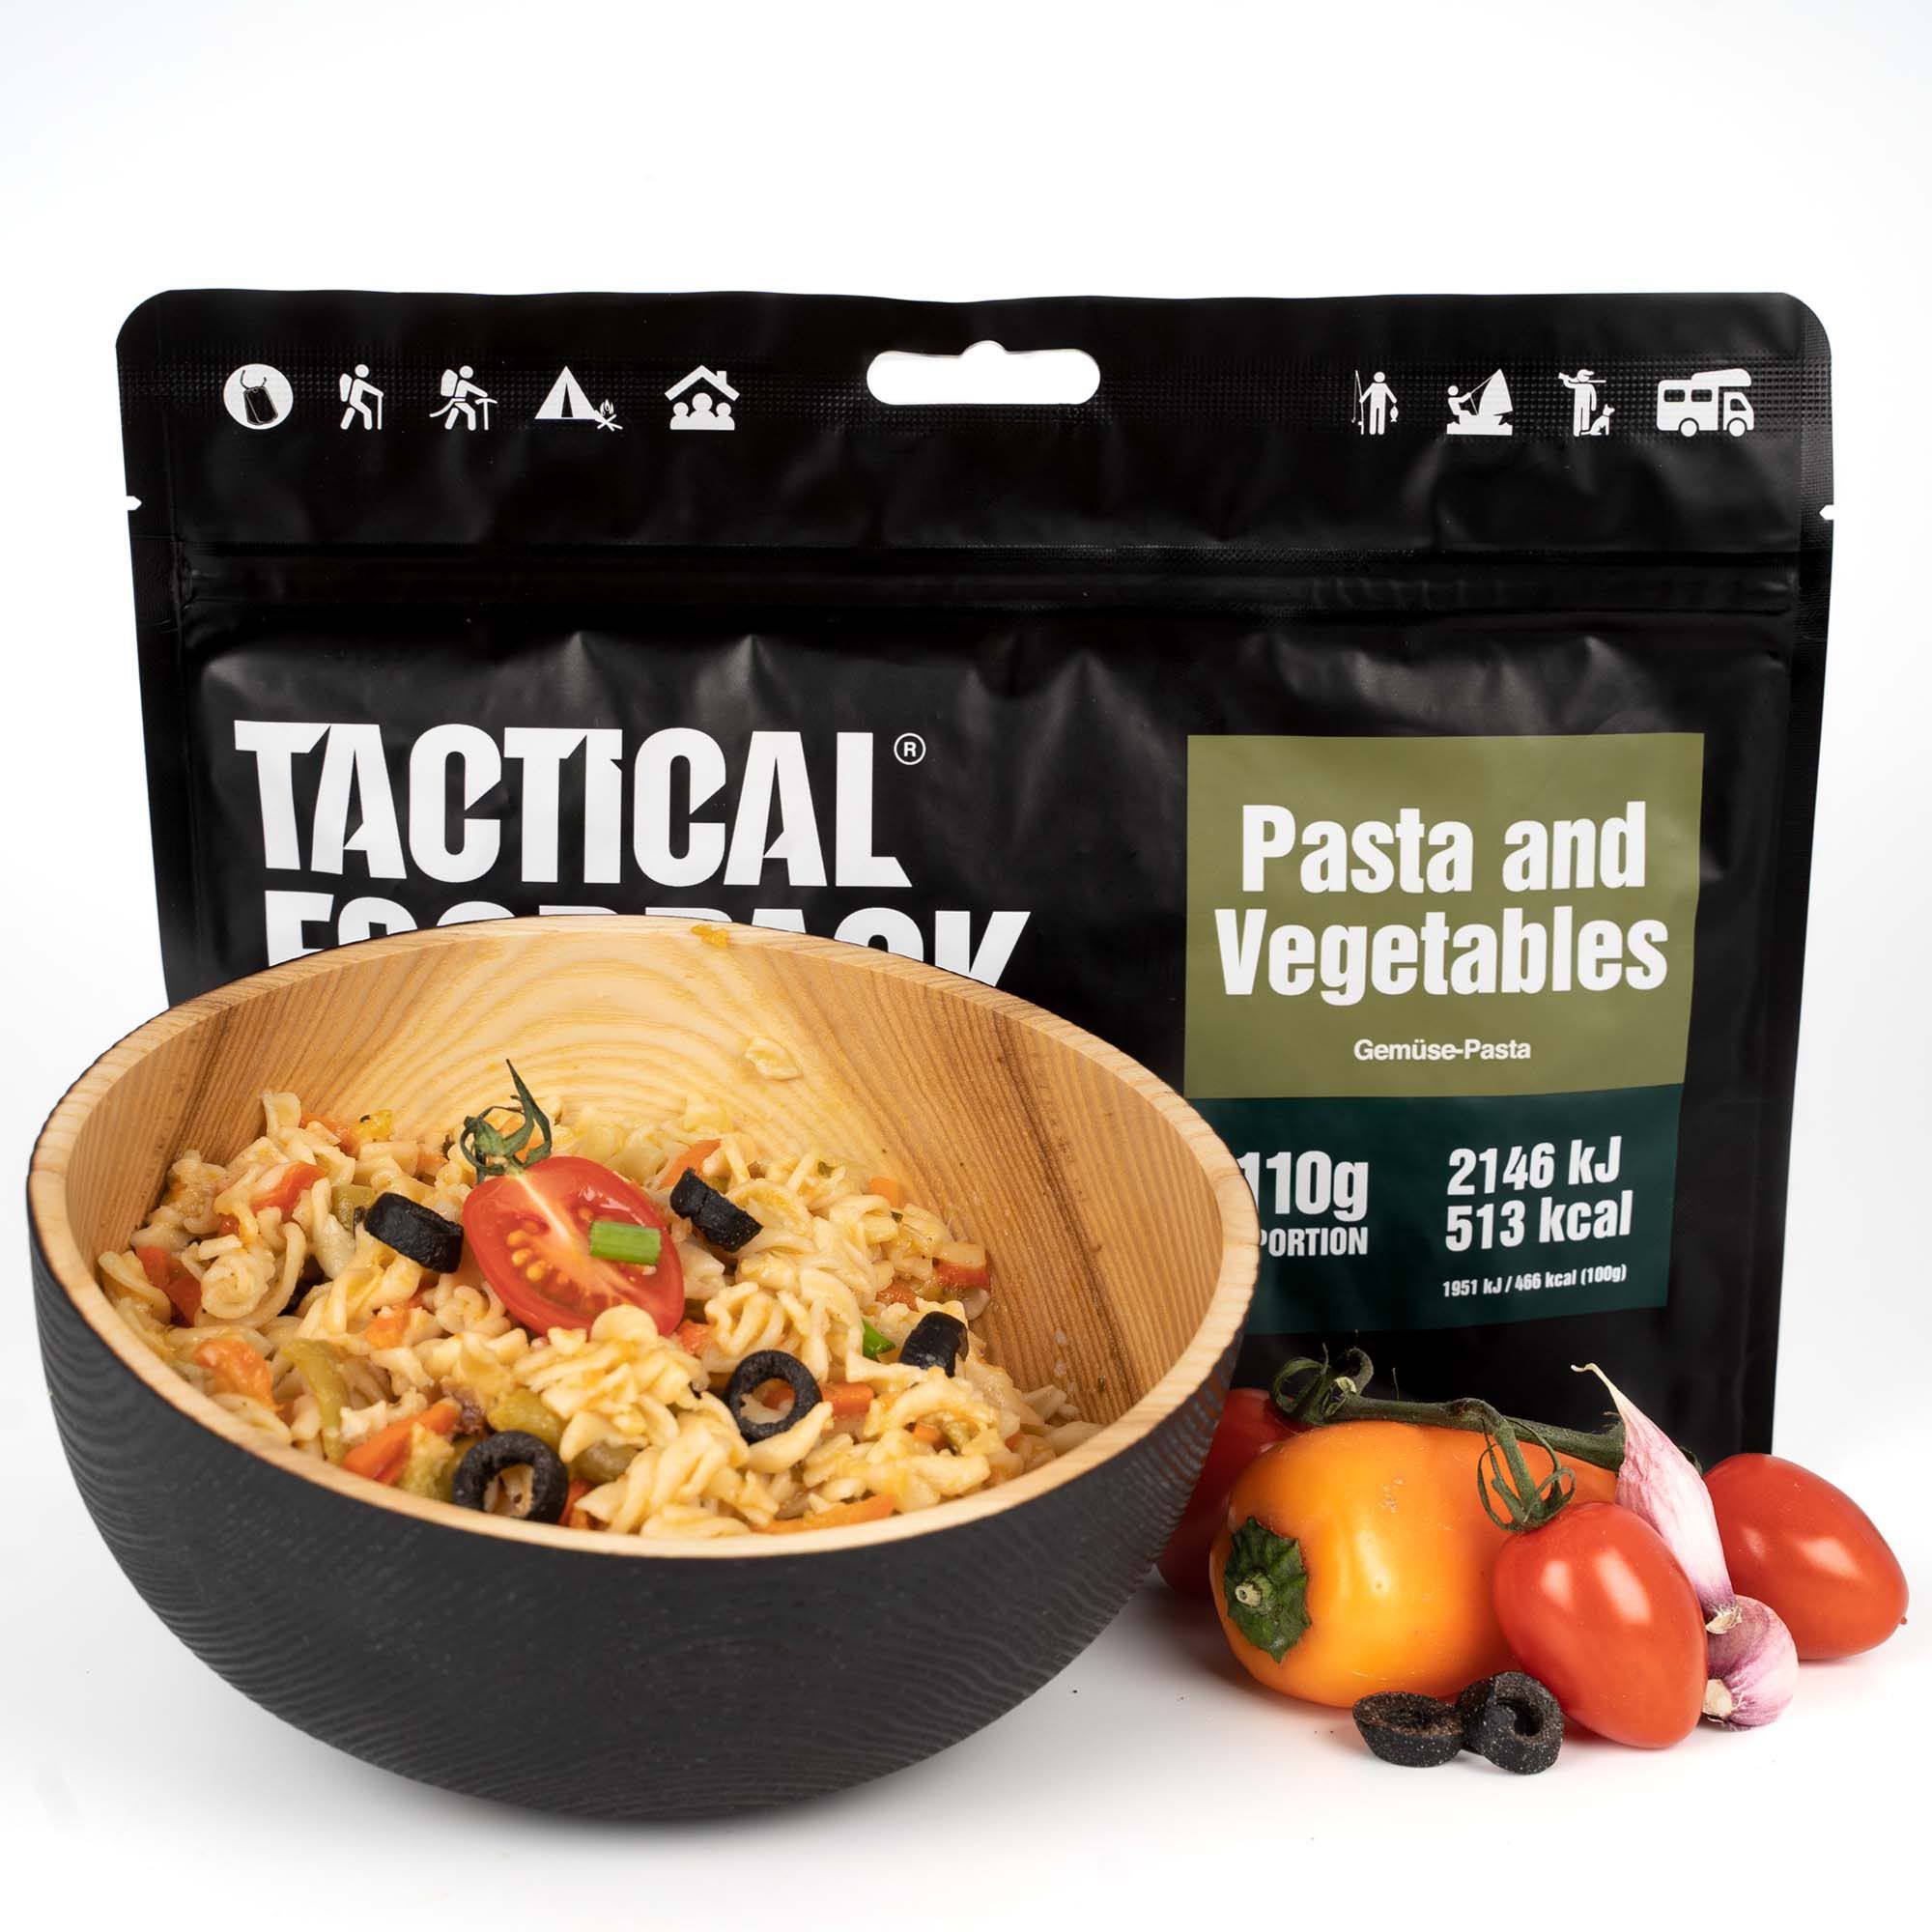 Tactical Foodpack Pasta And Vegatables